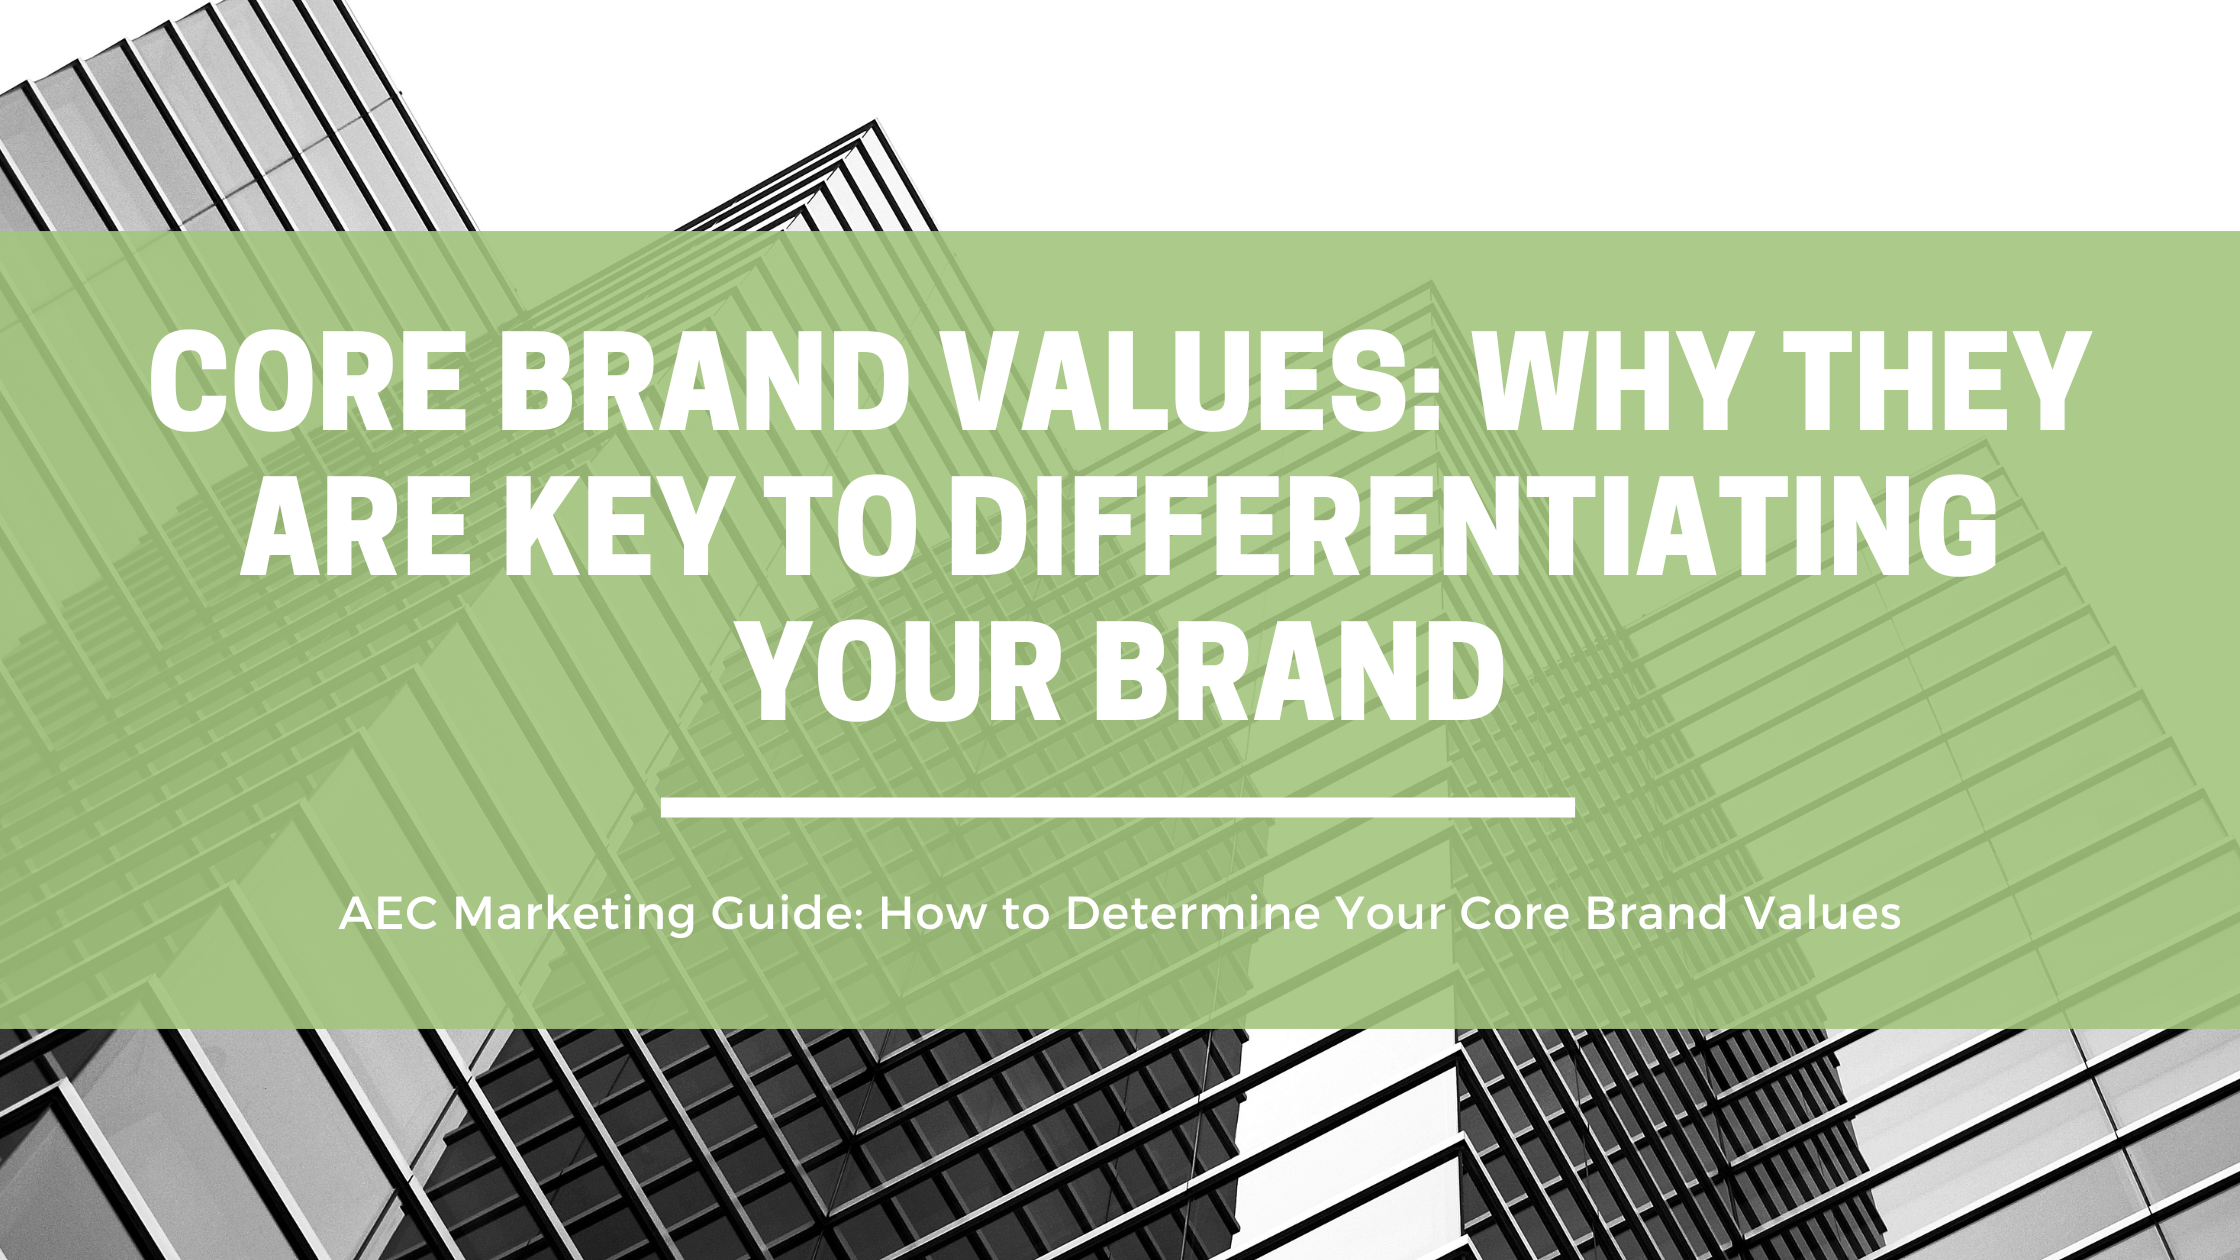 Core Brand Values: Why They Are Key to Differentiating Your Brand